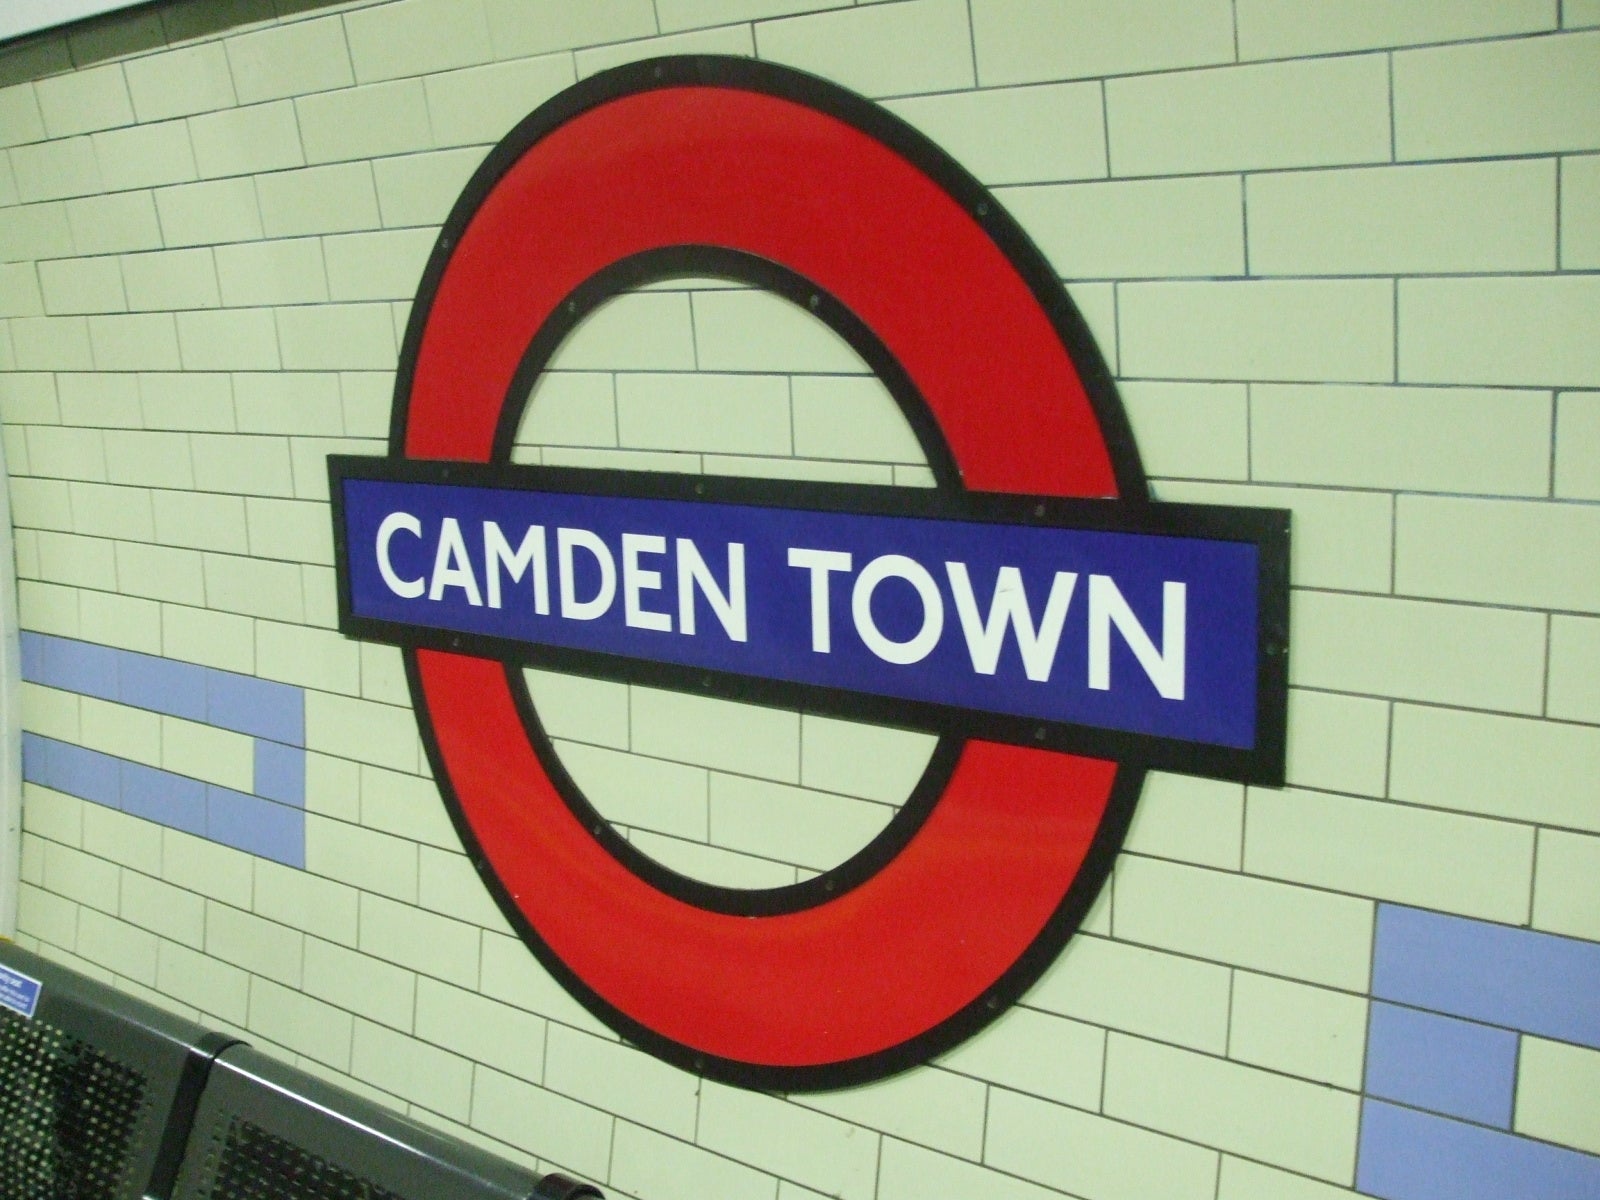 Camden Town station in north London